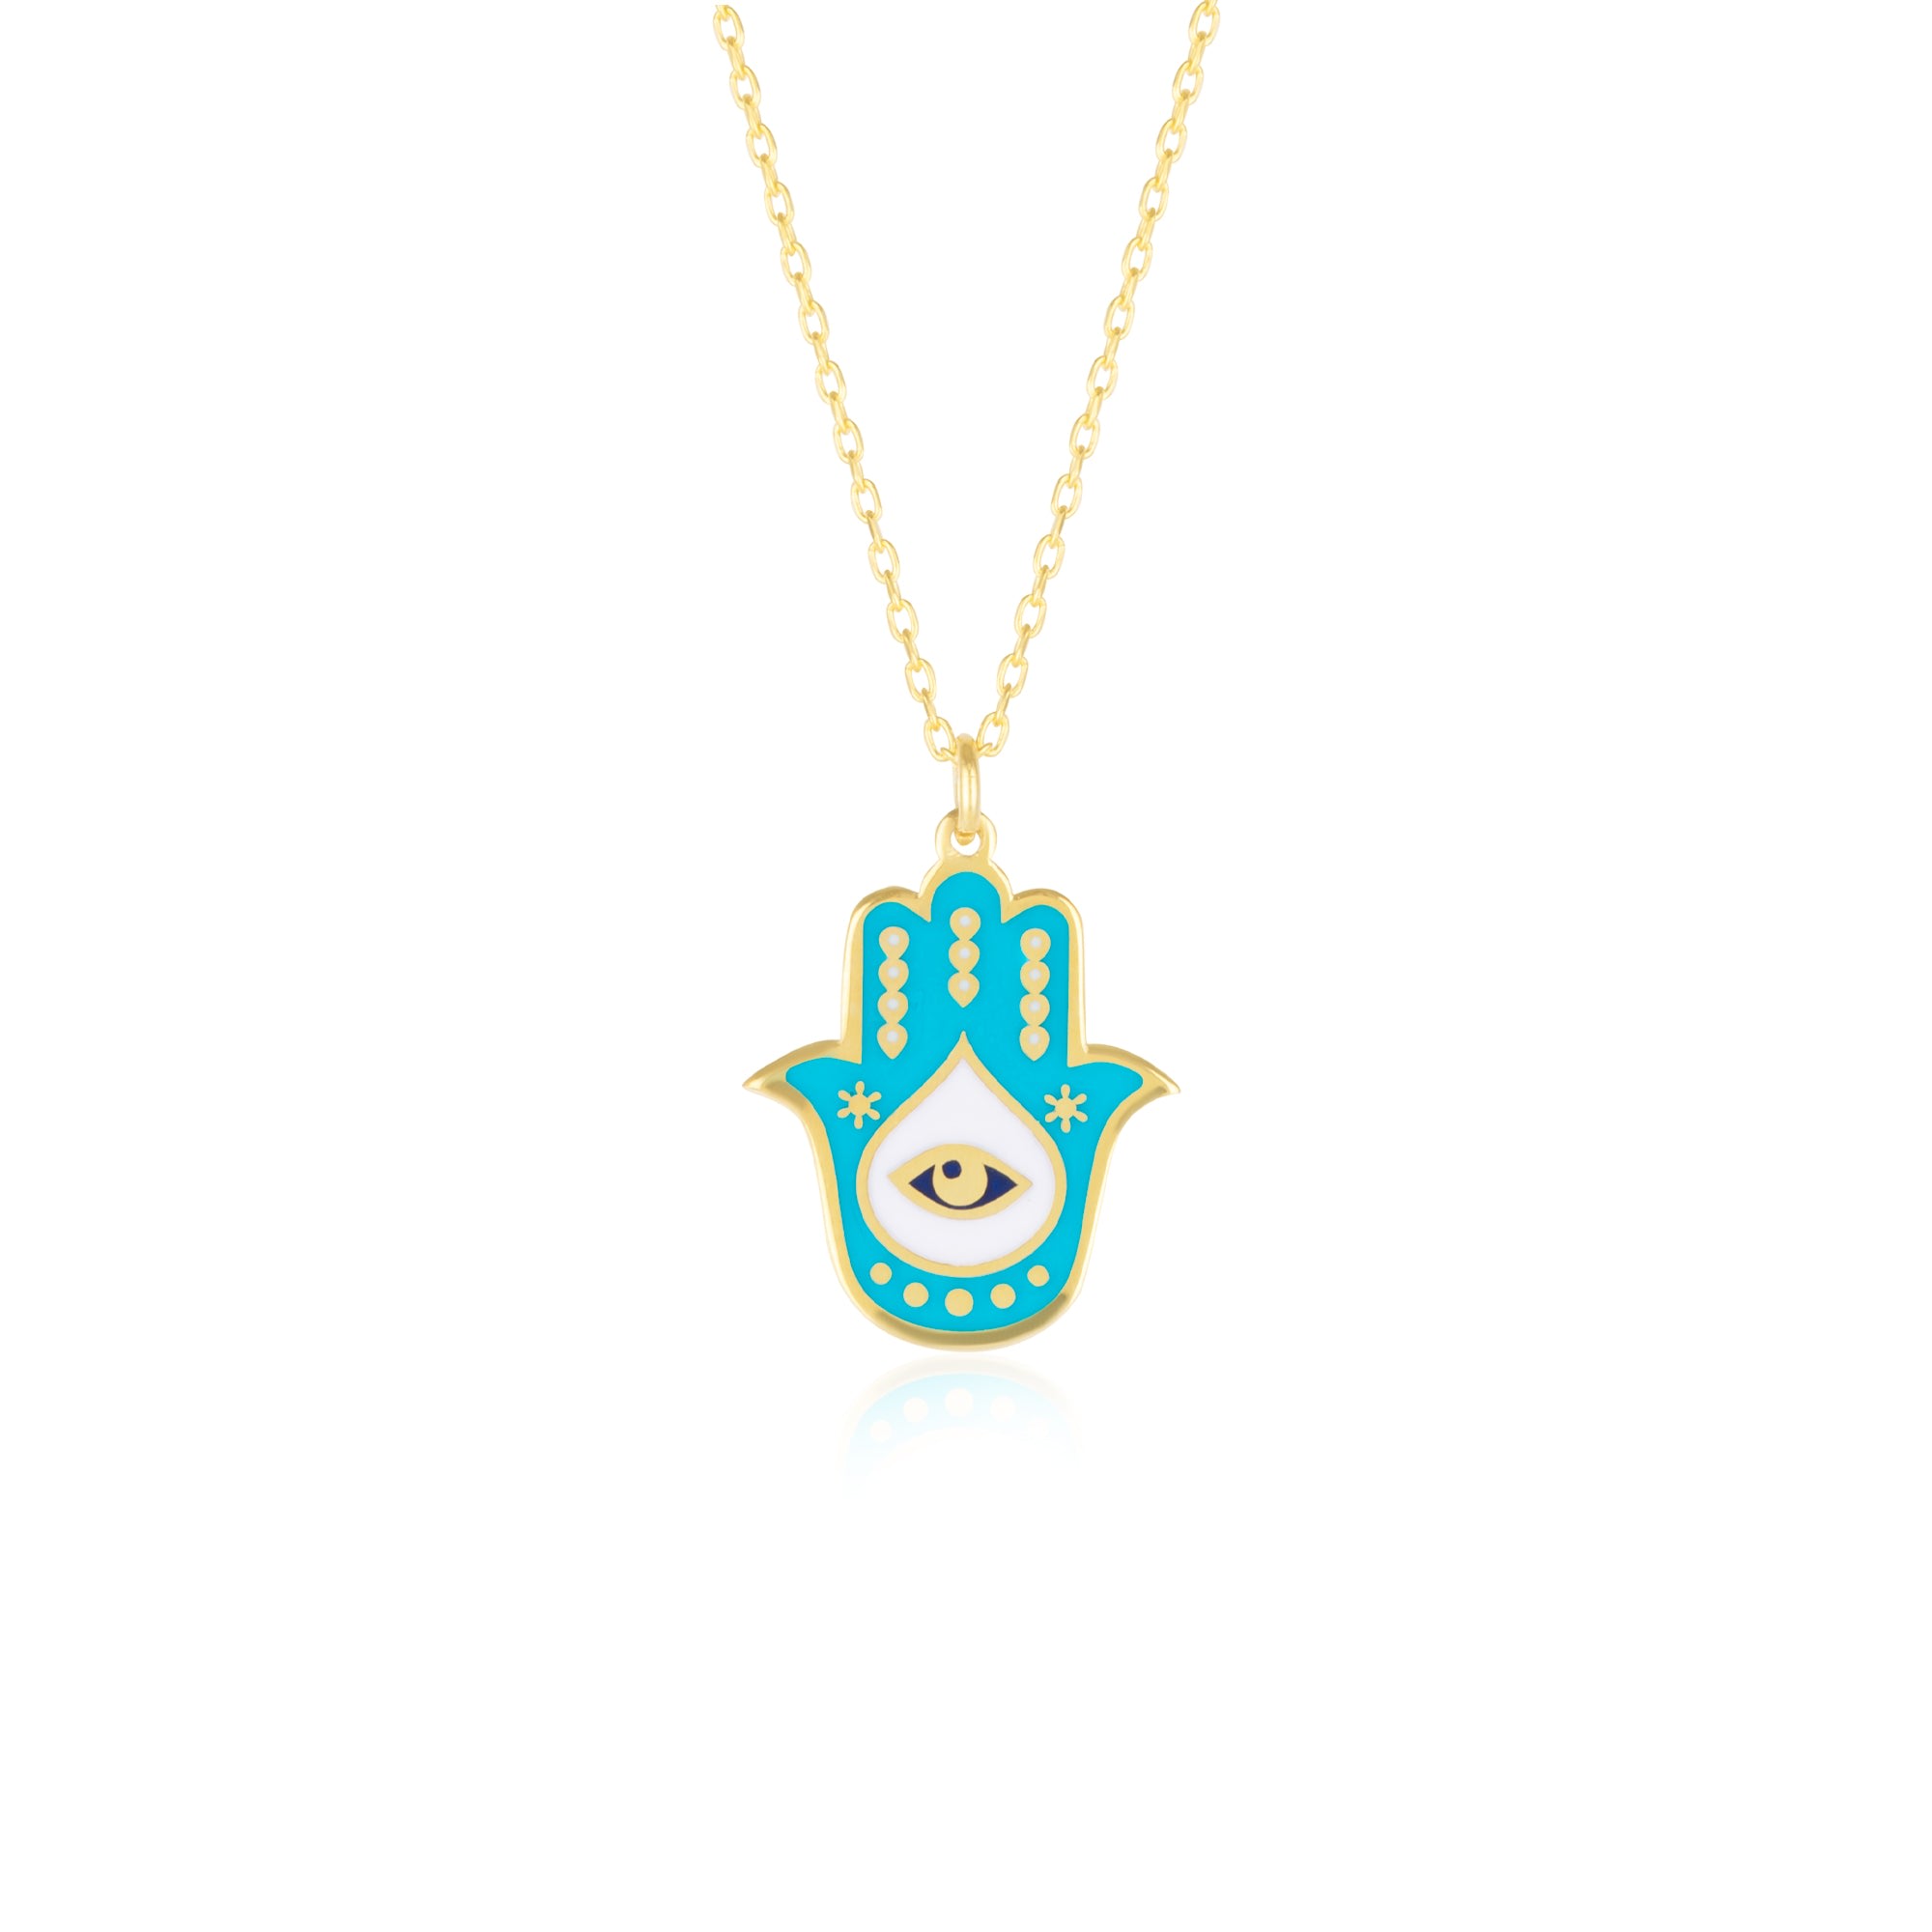 Spero London Women's Gold Authentic Turquoise Color Hamsa Hand Necklace Sterling Silver